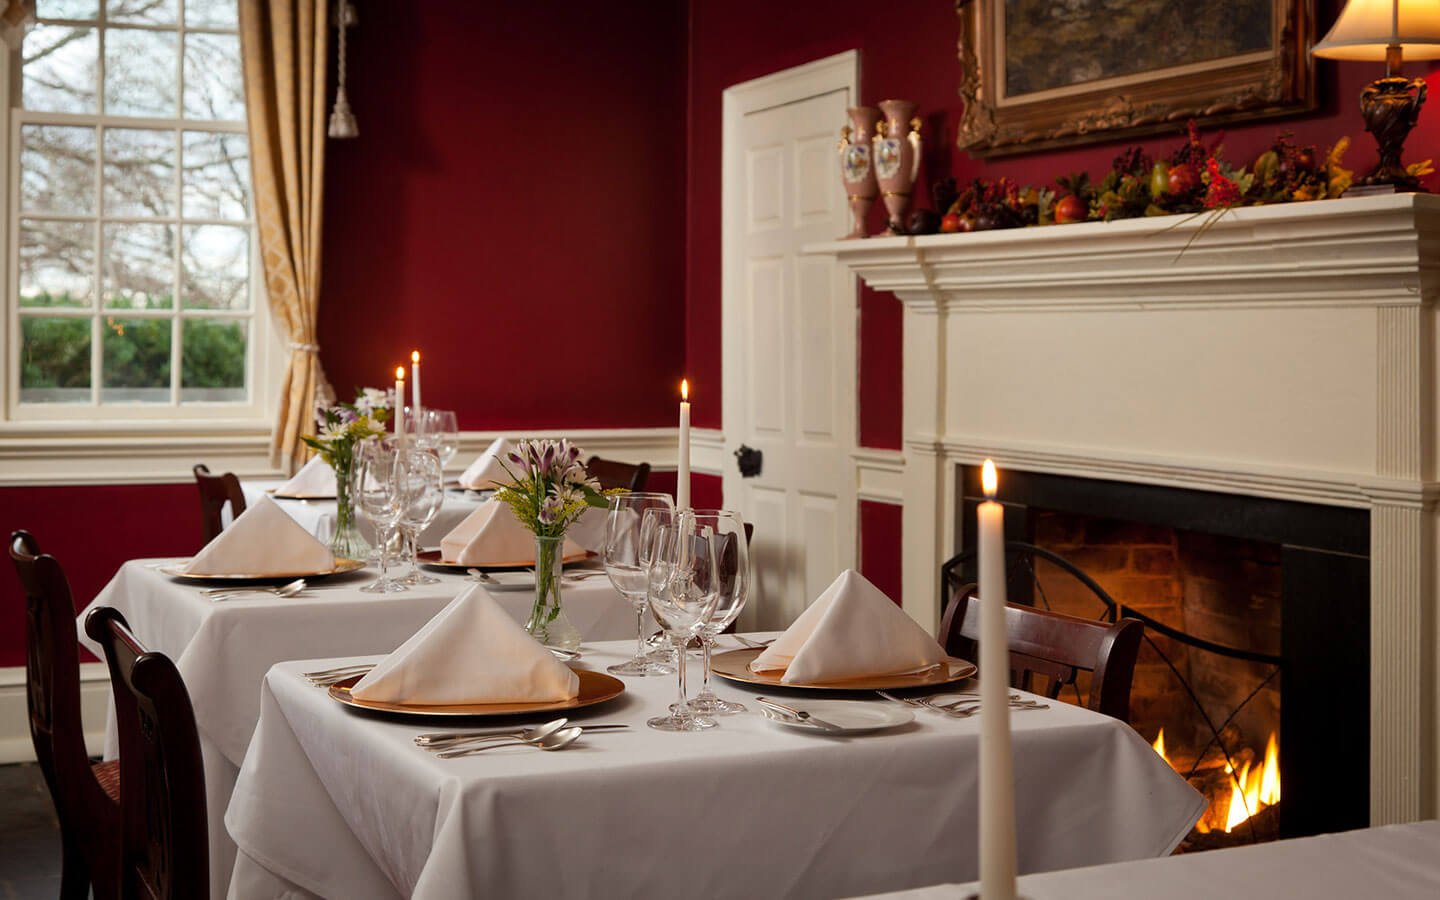 Casual dining in a historic manor house